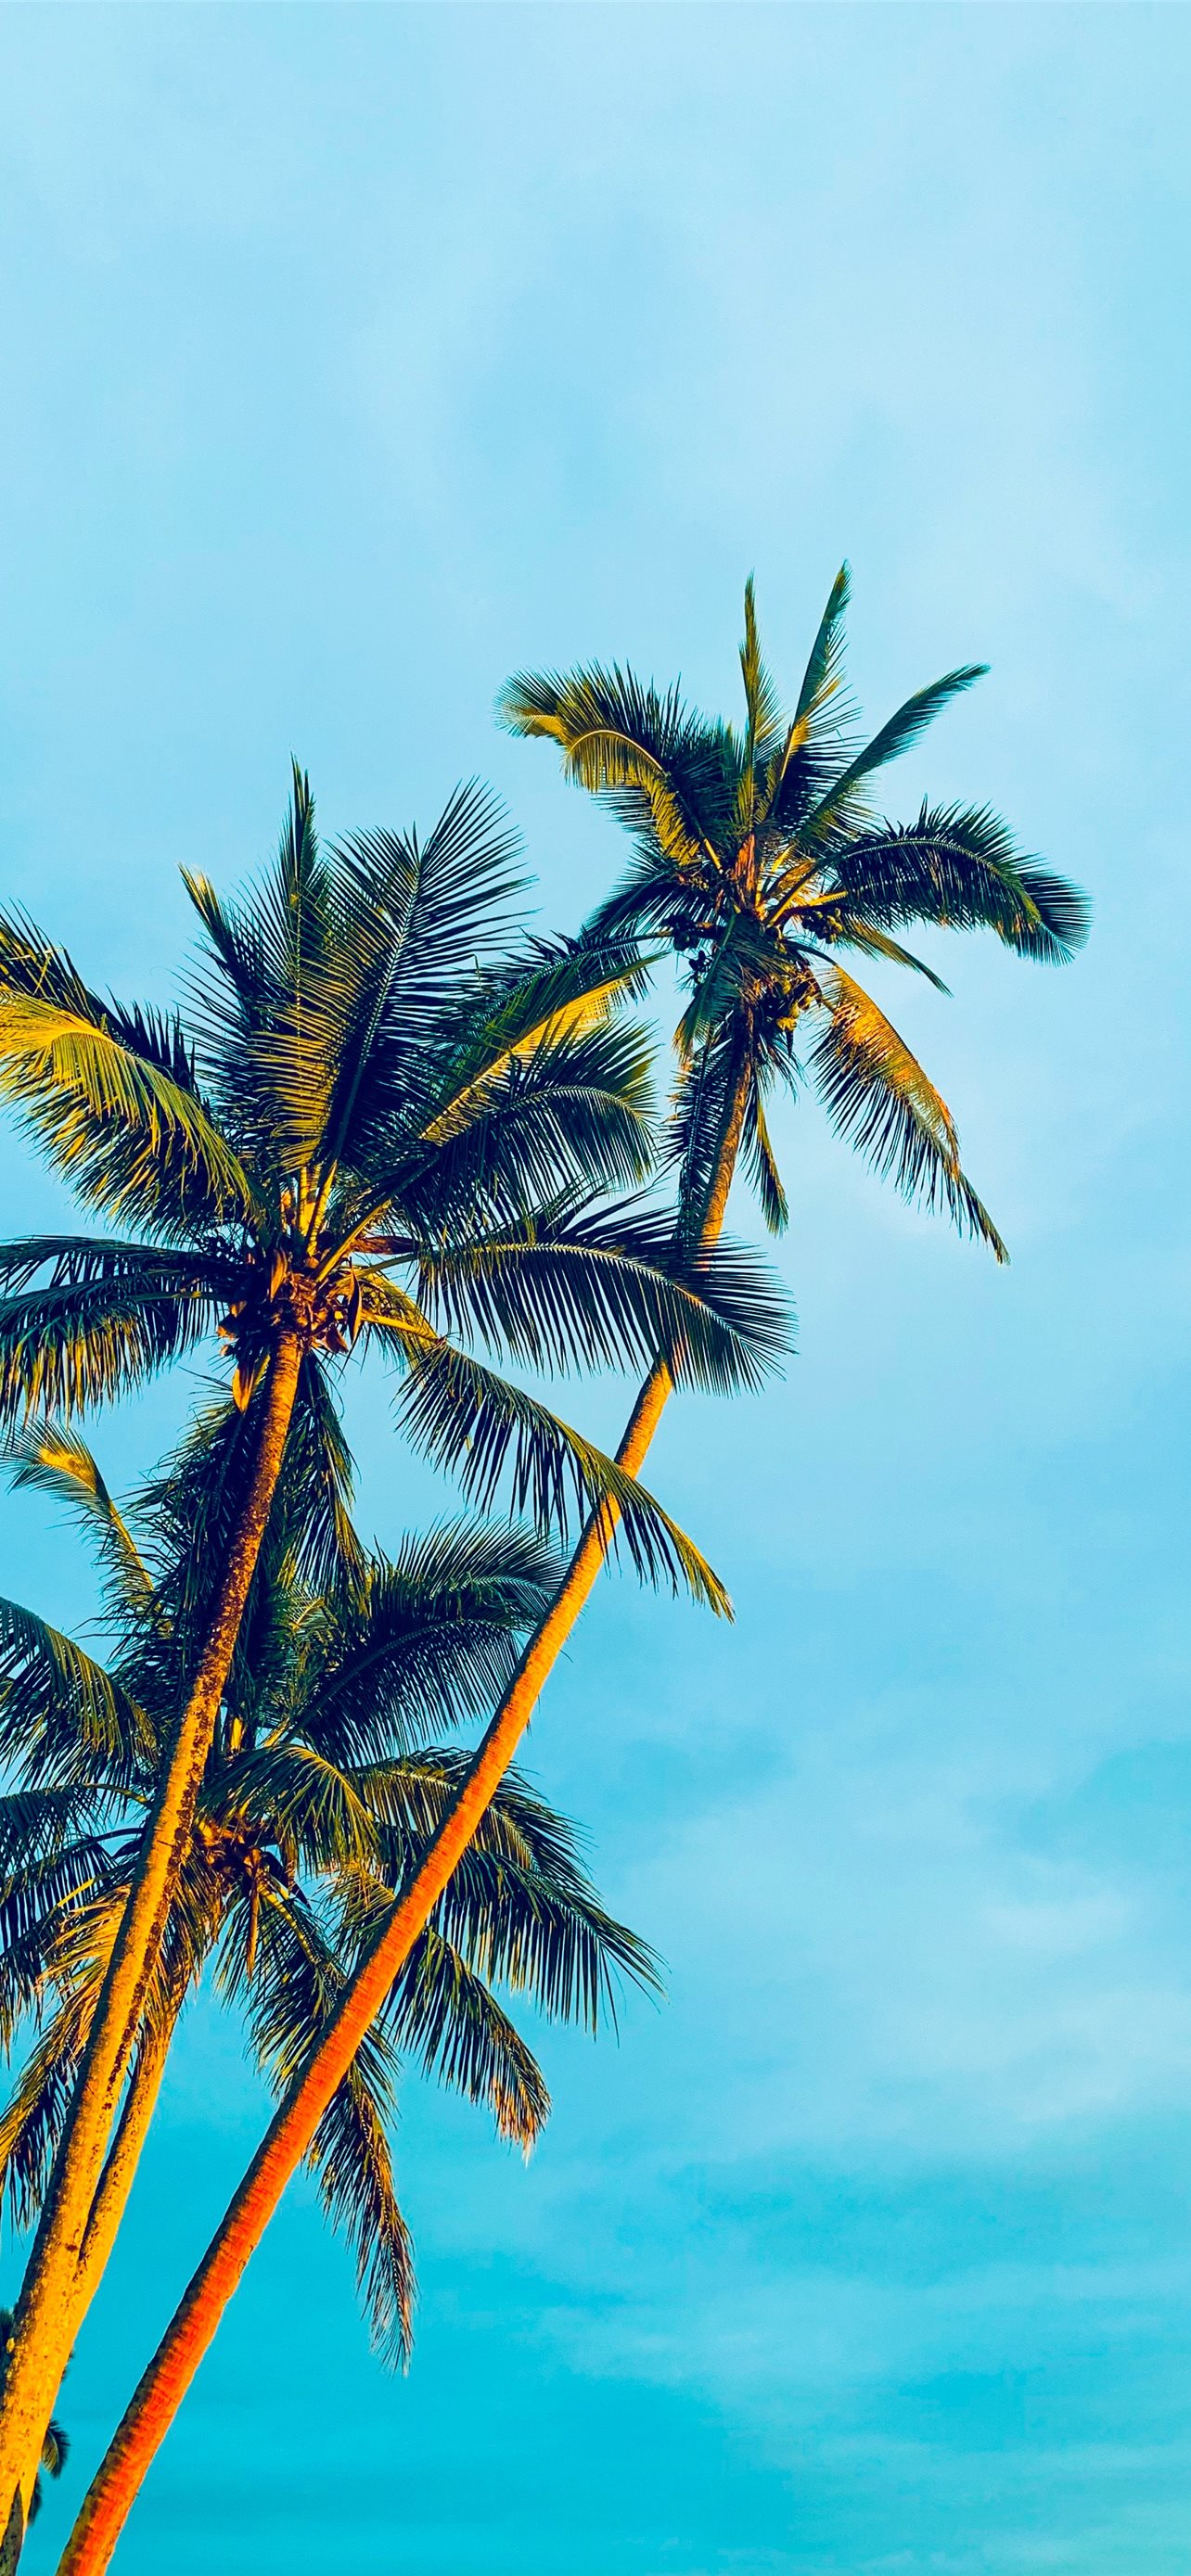 coconut trees under blue sky during daytime iPhone 12 Wallpapers Free  Download